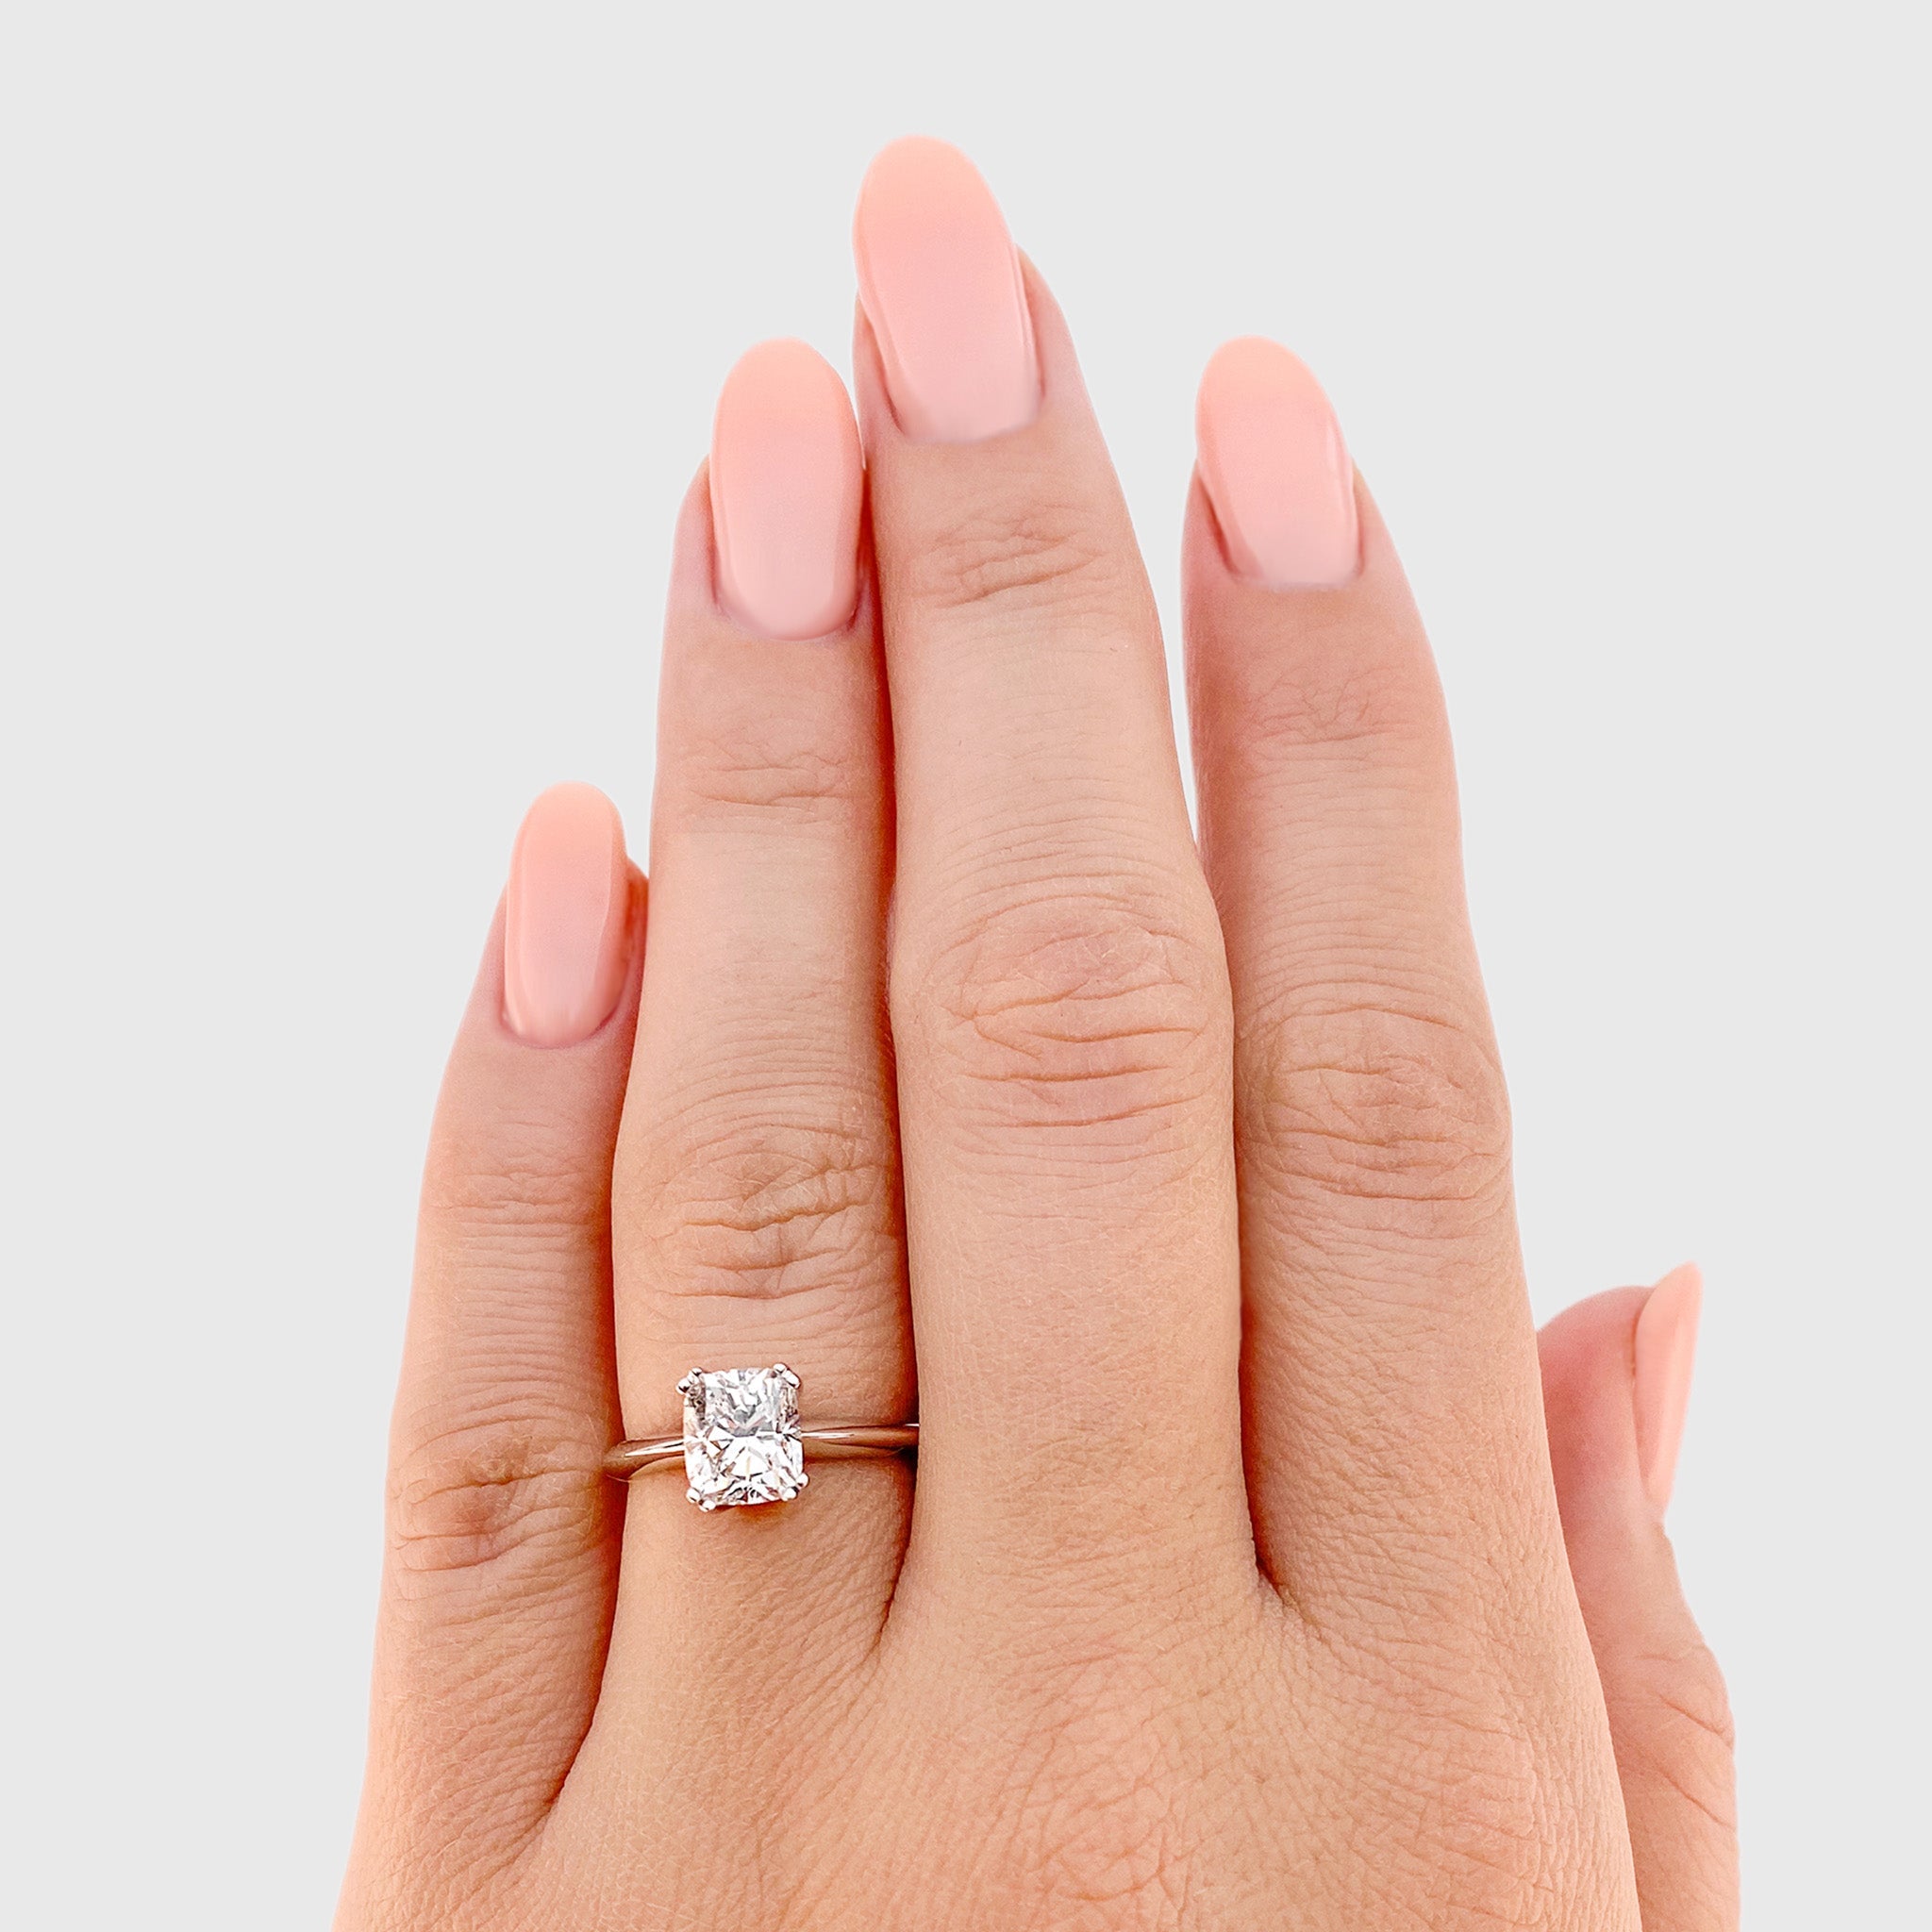 Solitaire Diamond Engagement Ring - Model View - SHIMANSKY.CO.ZA